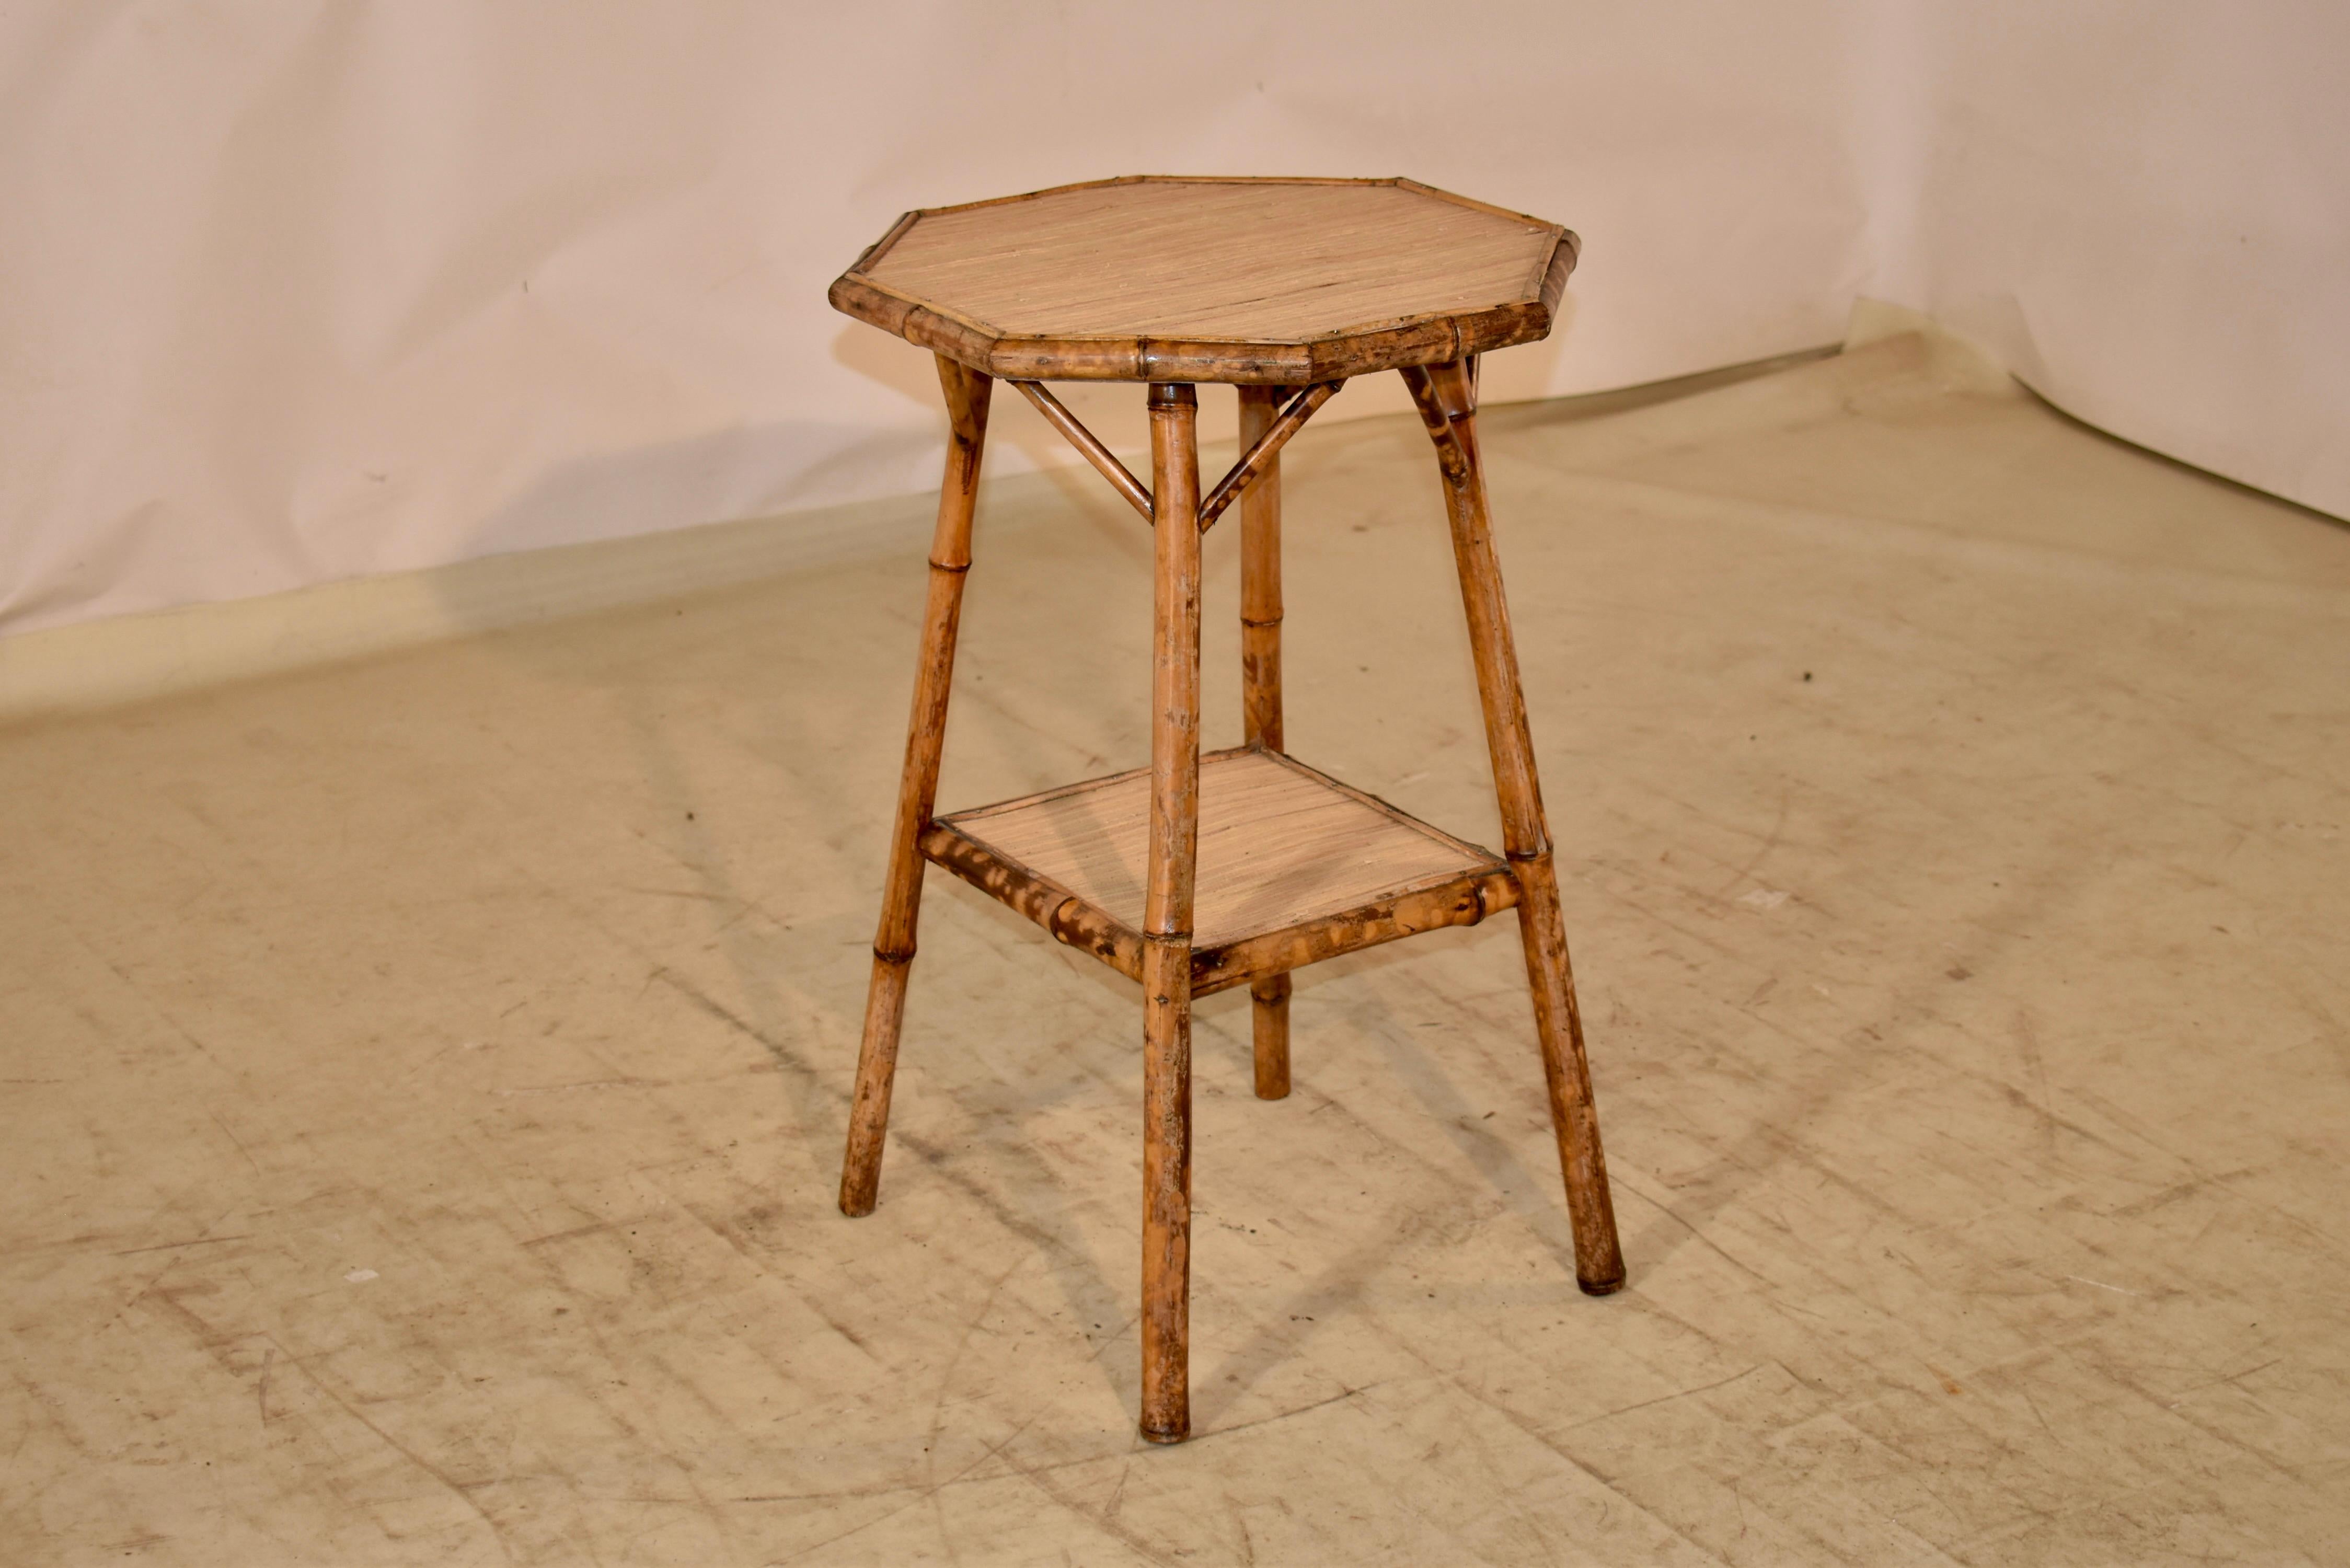 19th century bamboo side table from France.  The top is octagonal in shape and is supported on splayed legs, which are joined at the bottom by a lower shelf, both covered in seagrass.  This table has a lovely shape and color, and would be an